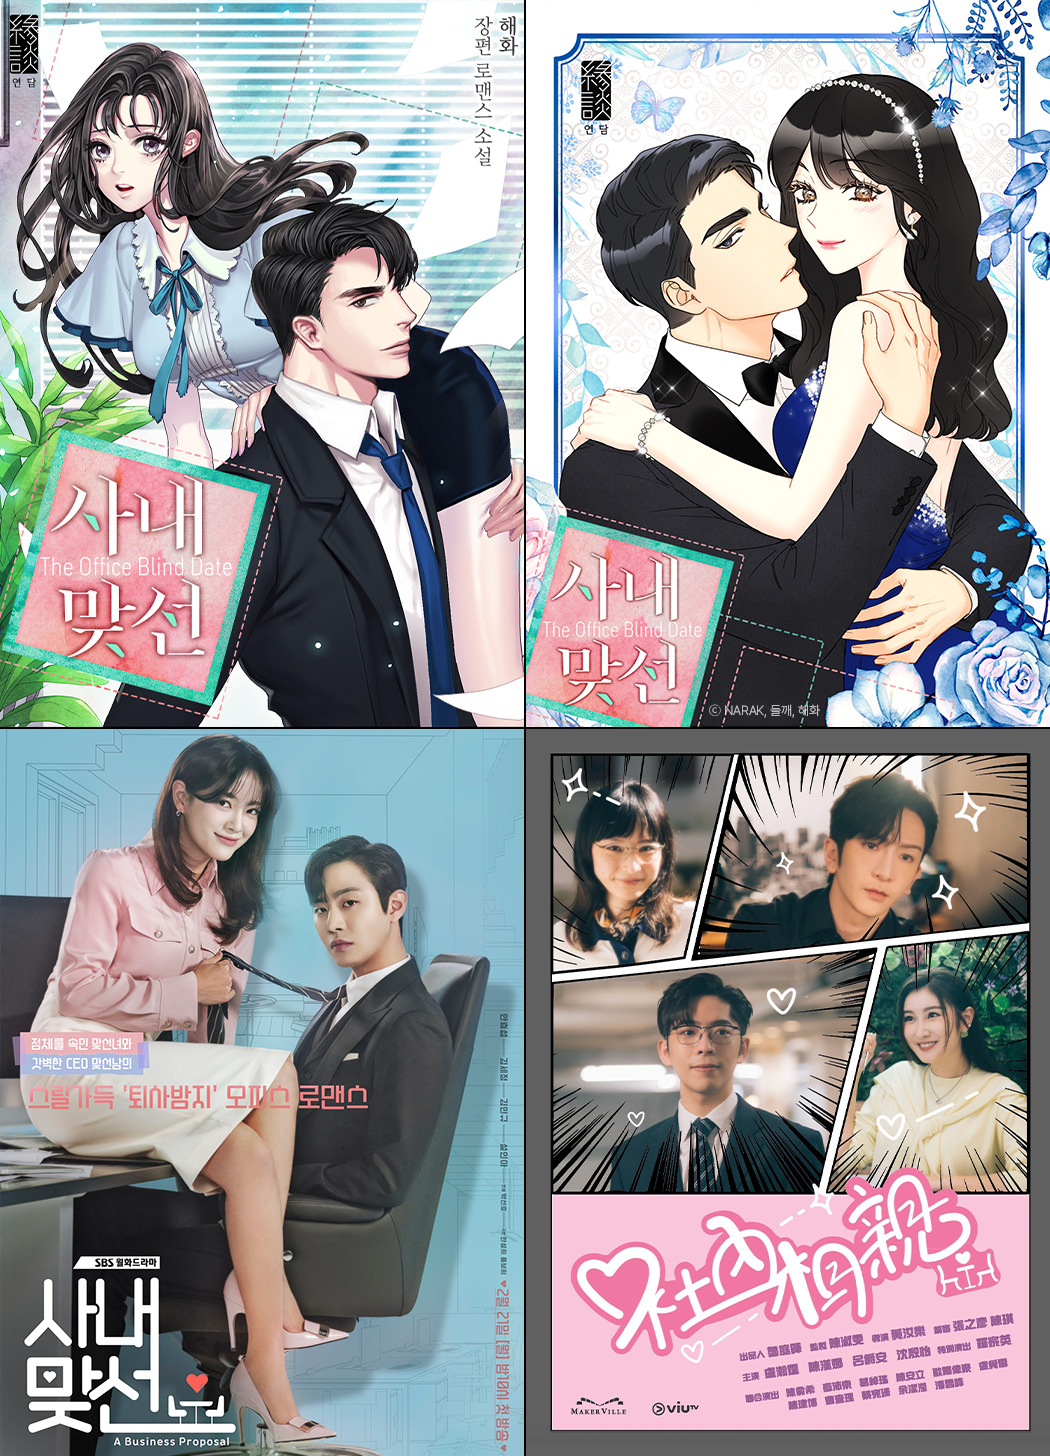 (Clockwise from top left) Poster images for the web novel 